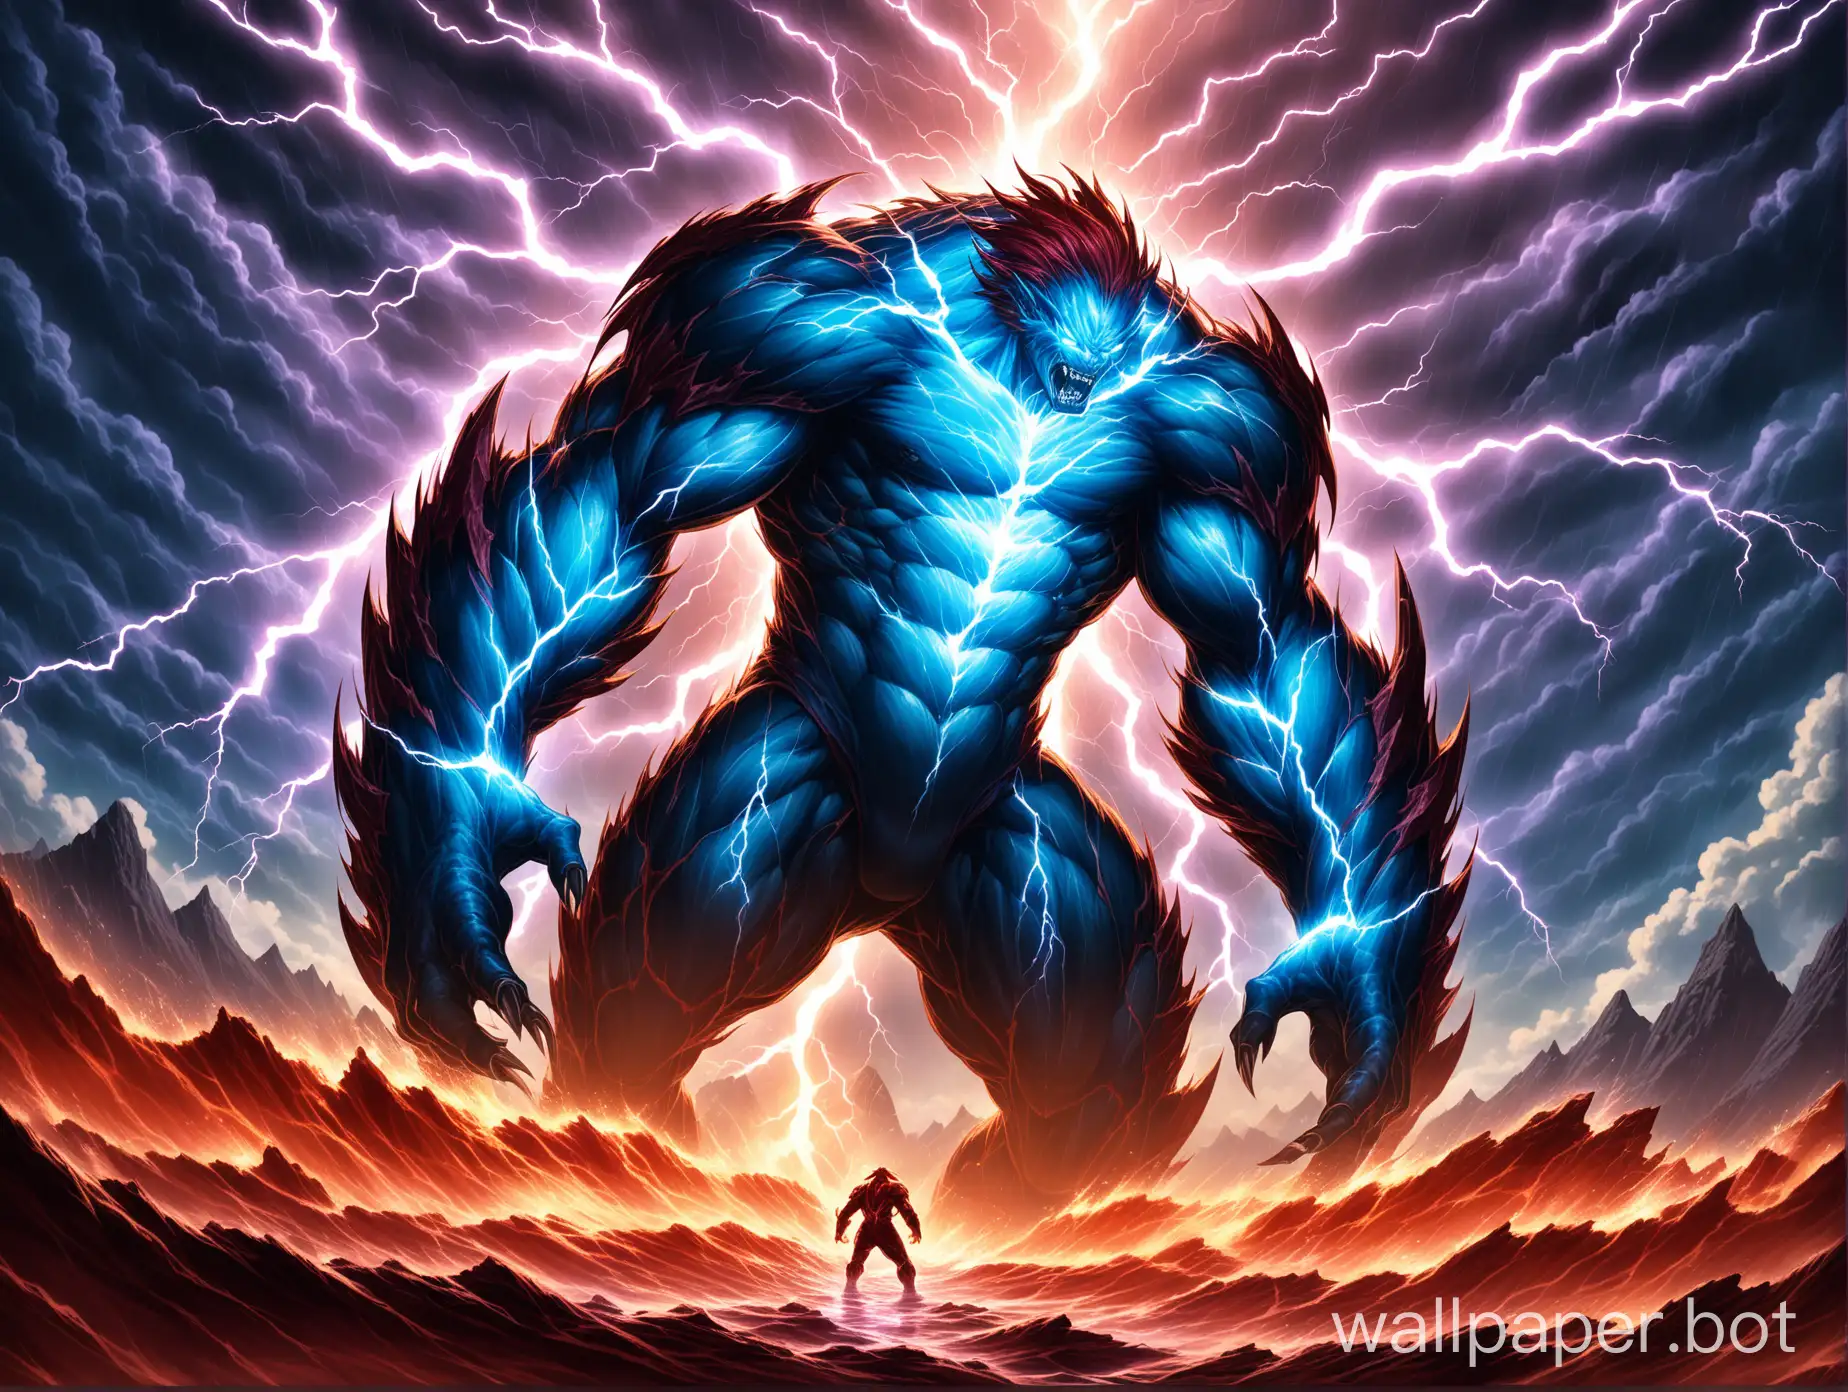 Zaxy, a mythical lightning-themed creature, amidst the clash of two legendary giants.An otherworldly and ethereal creature, resembling swirling bolts of lightning. Its body could be composed of luminous tendrils of energy, its eyes glowing with an intense, electric blue light. It could be depicted in a dynamic pose, its form contorted and energized as it moves amidst the clashing titans.Two colossal figures locked in an epic battle, their forms towering over the landscape. One titan could represent the raw power of nature, its body composed of raging storms and tempestuous winds. The other titan could embody the forces of chaos and destruction, its form shrouded in darkness and fire. Bolts of lightning arcing across the scene, illuminating the combatants and casting dramatic shadows. The lightning could be rendered in a stylized manner, reminiscent of traditional Japanese woodblock prints. The overall atmosphere should be one of intense energy and power, the clashing titans and the electrifying presence of Zaxy creating a visually stunning spectacle.